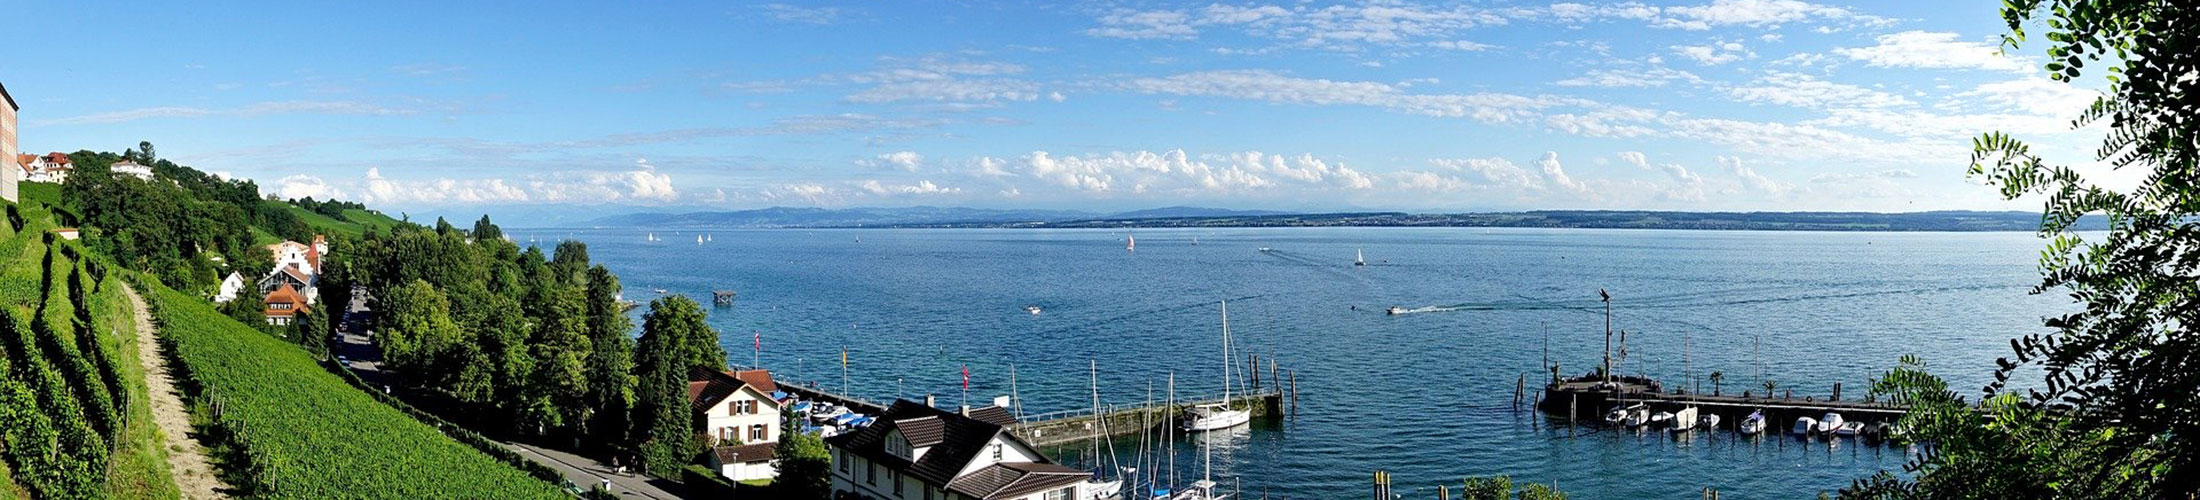 Bodensee5